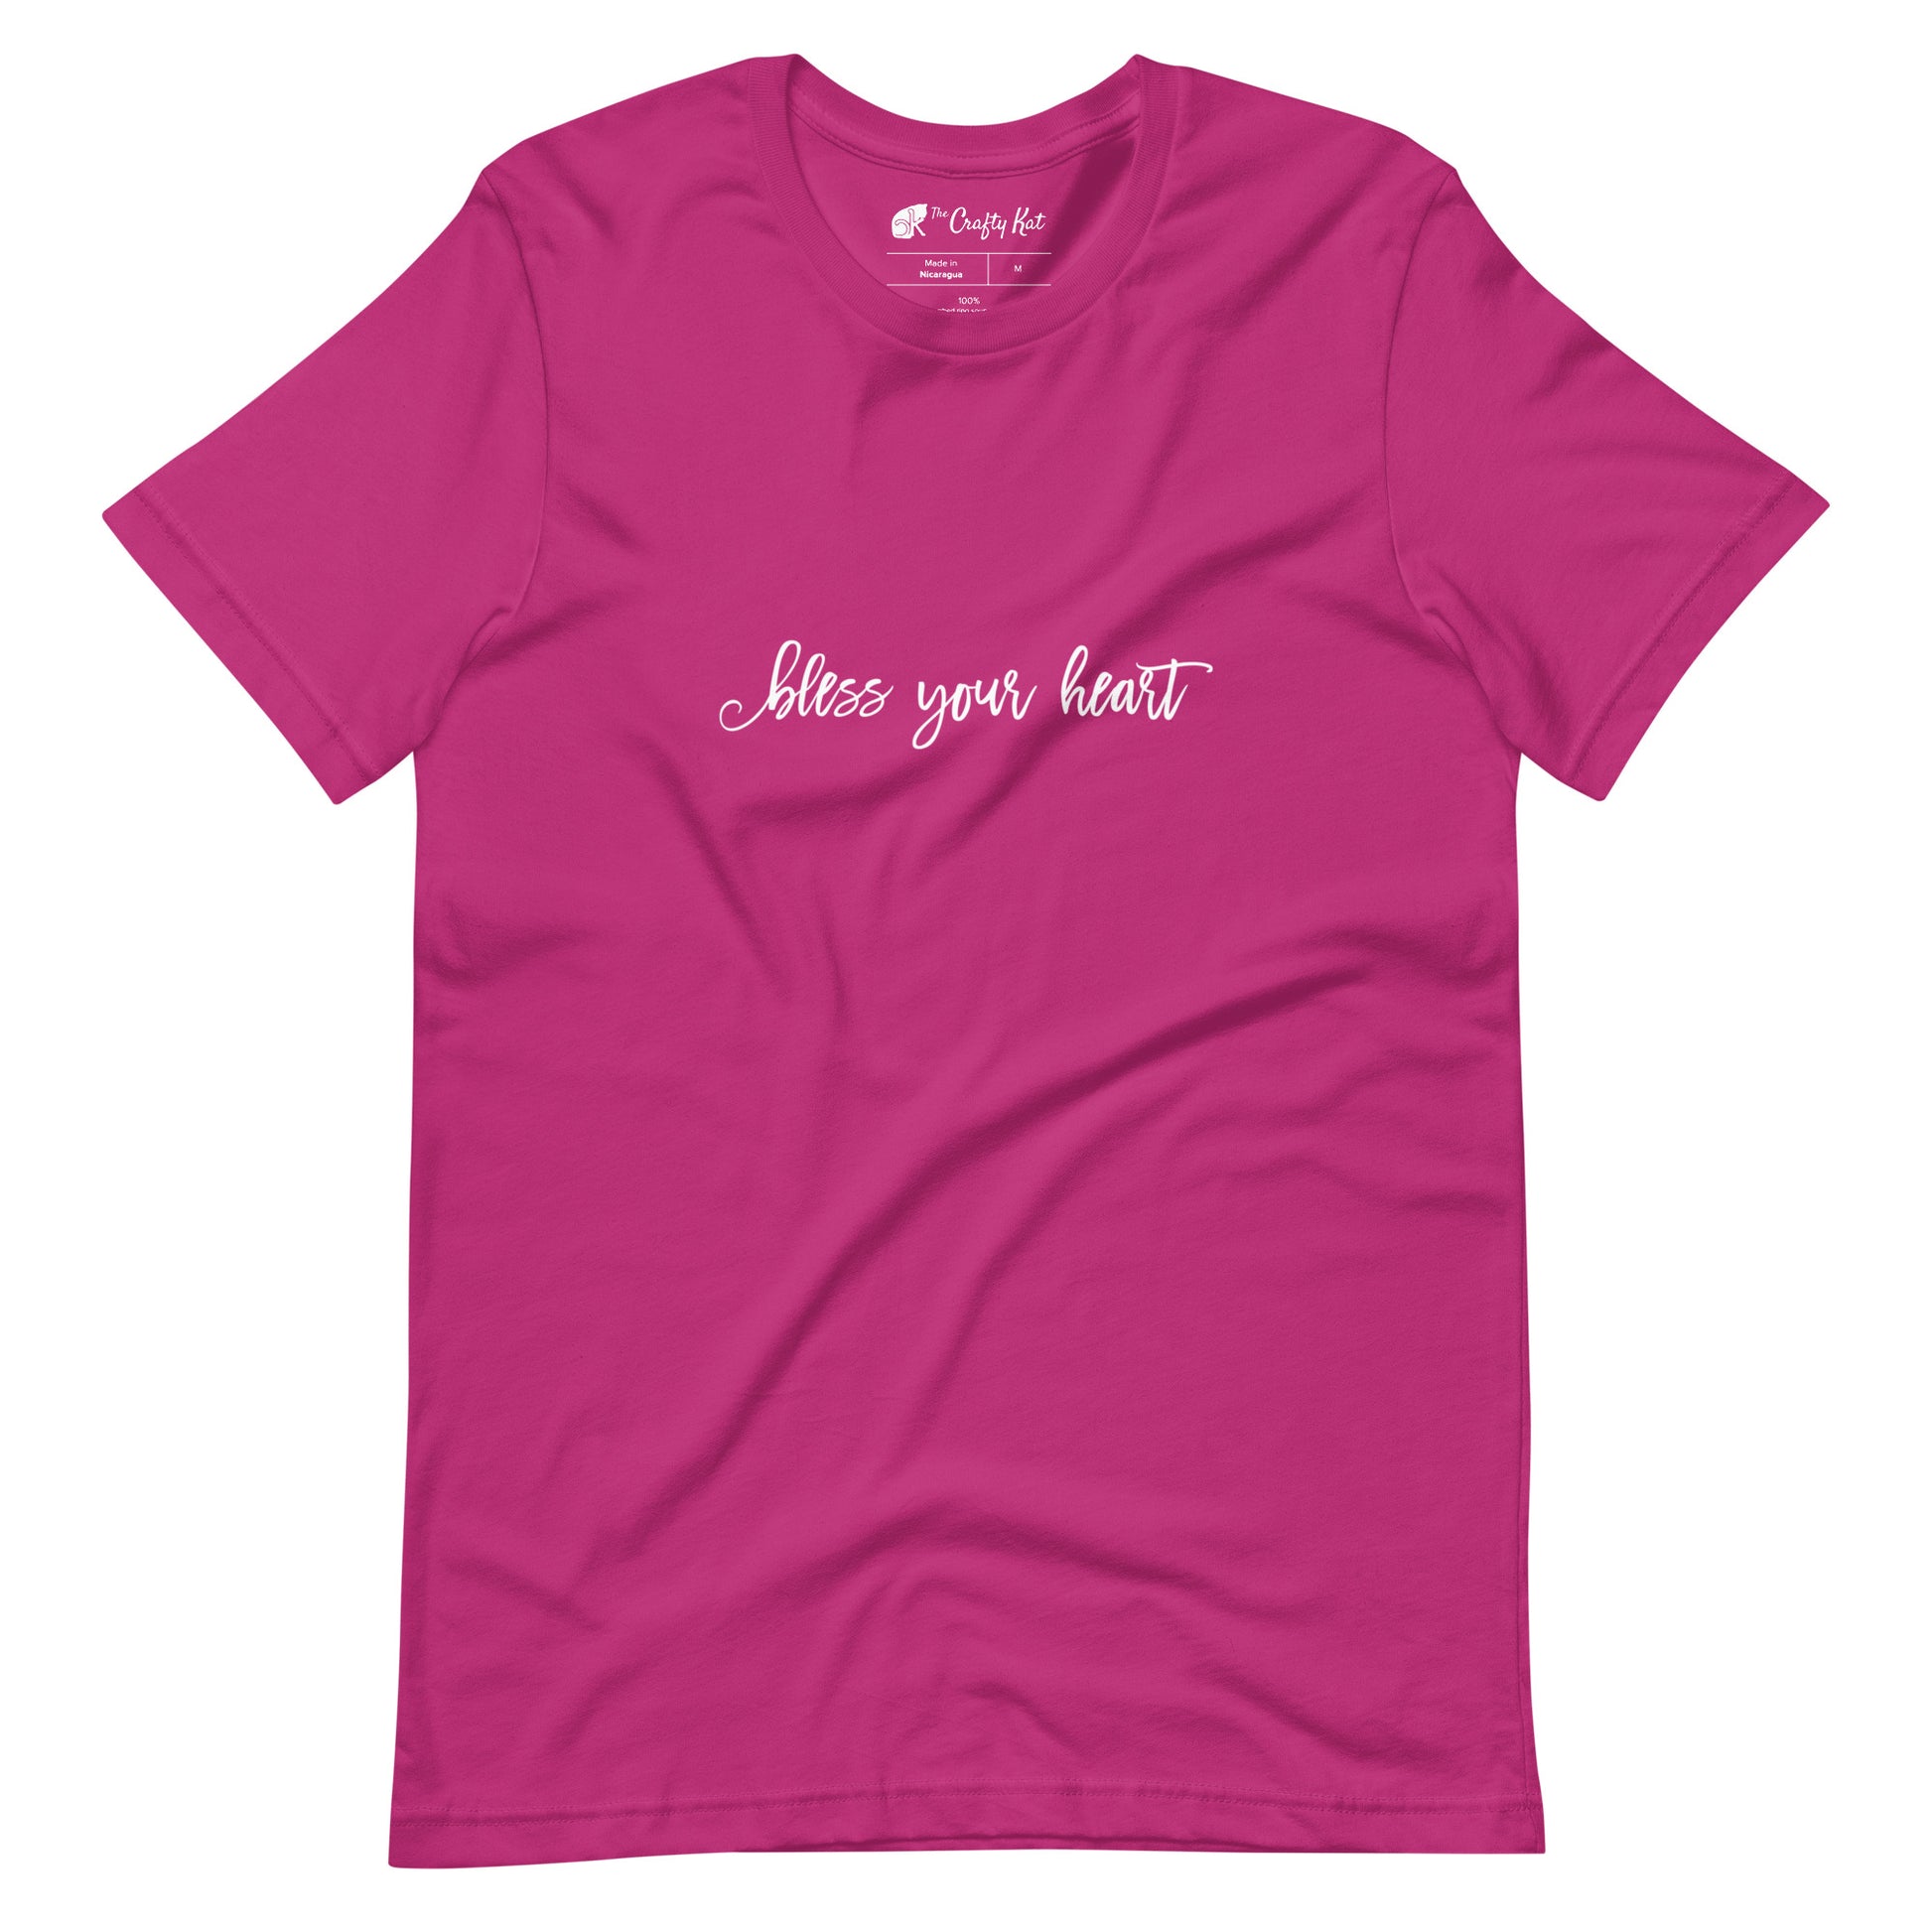 Berry (hot pink) t-shirt with white graphic in an excessively twee font: "bless your heart"